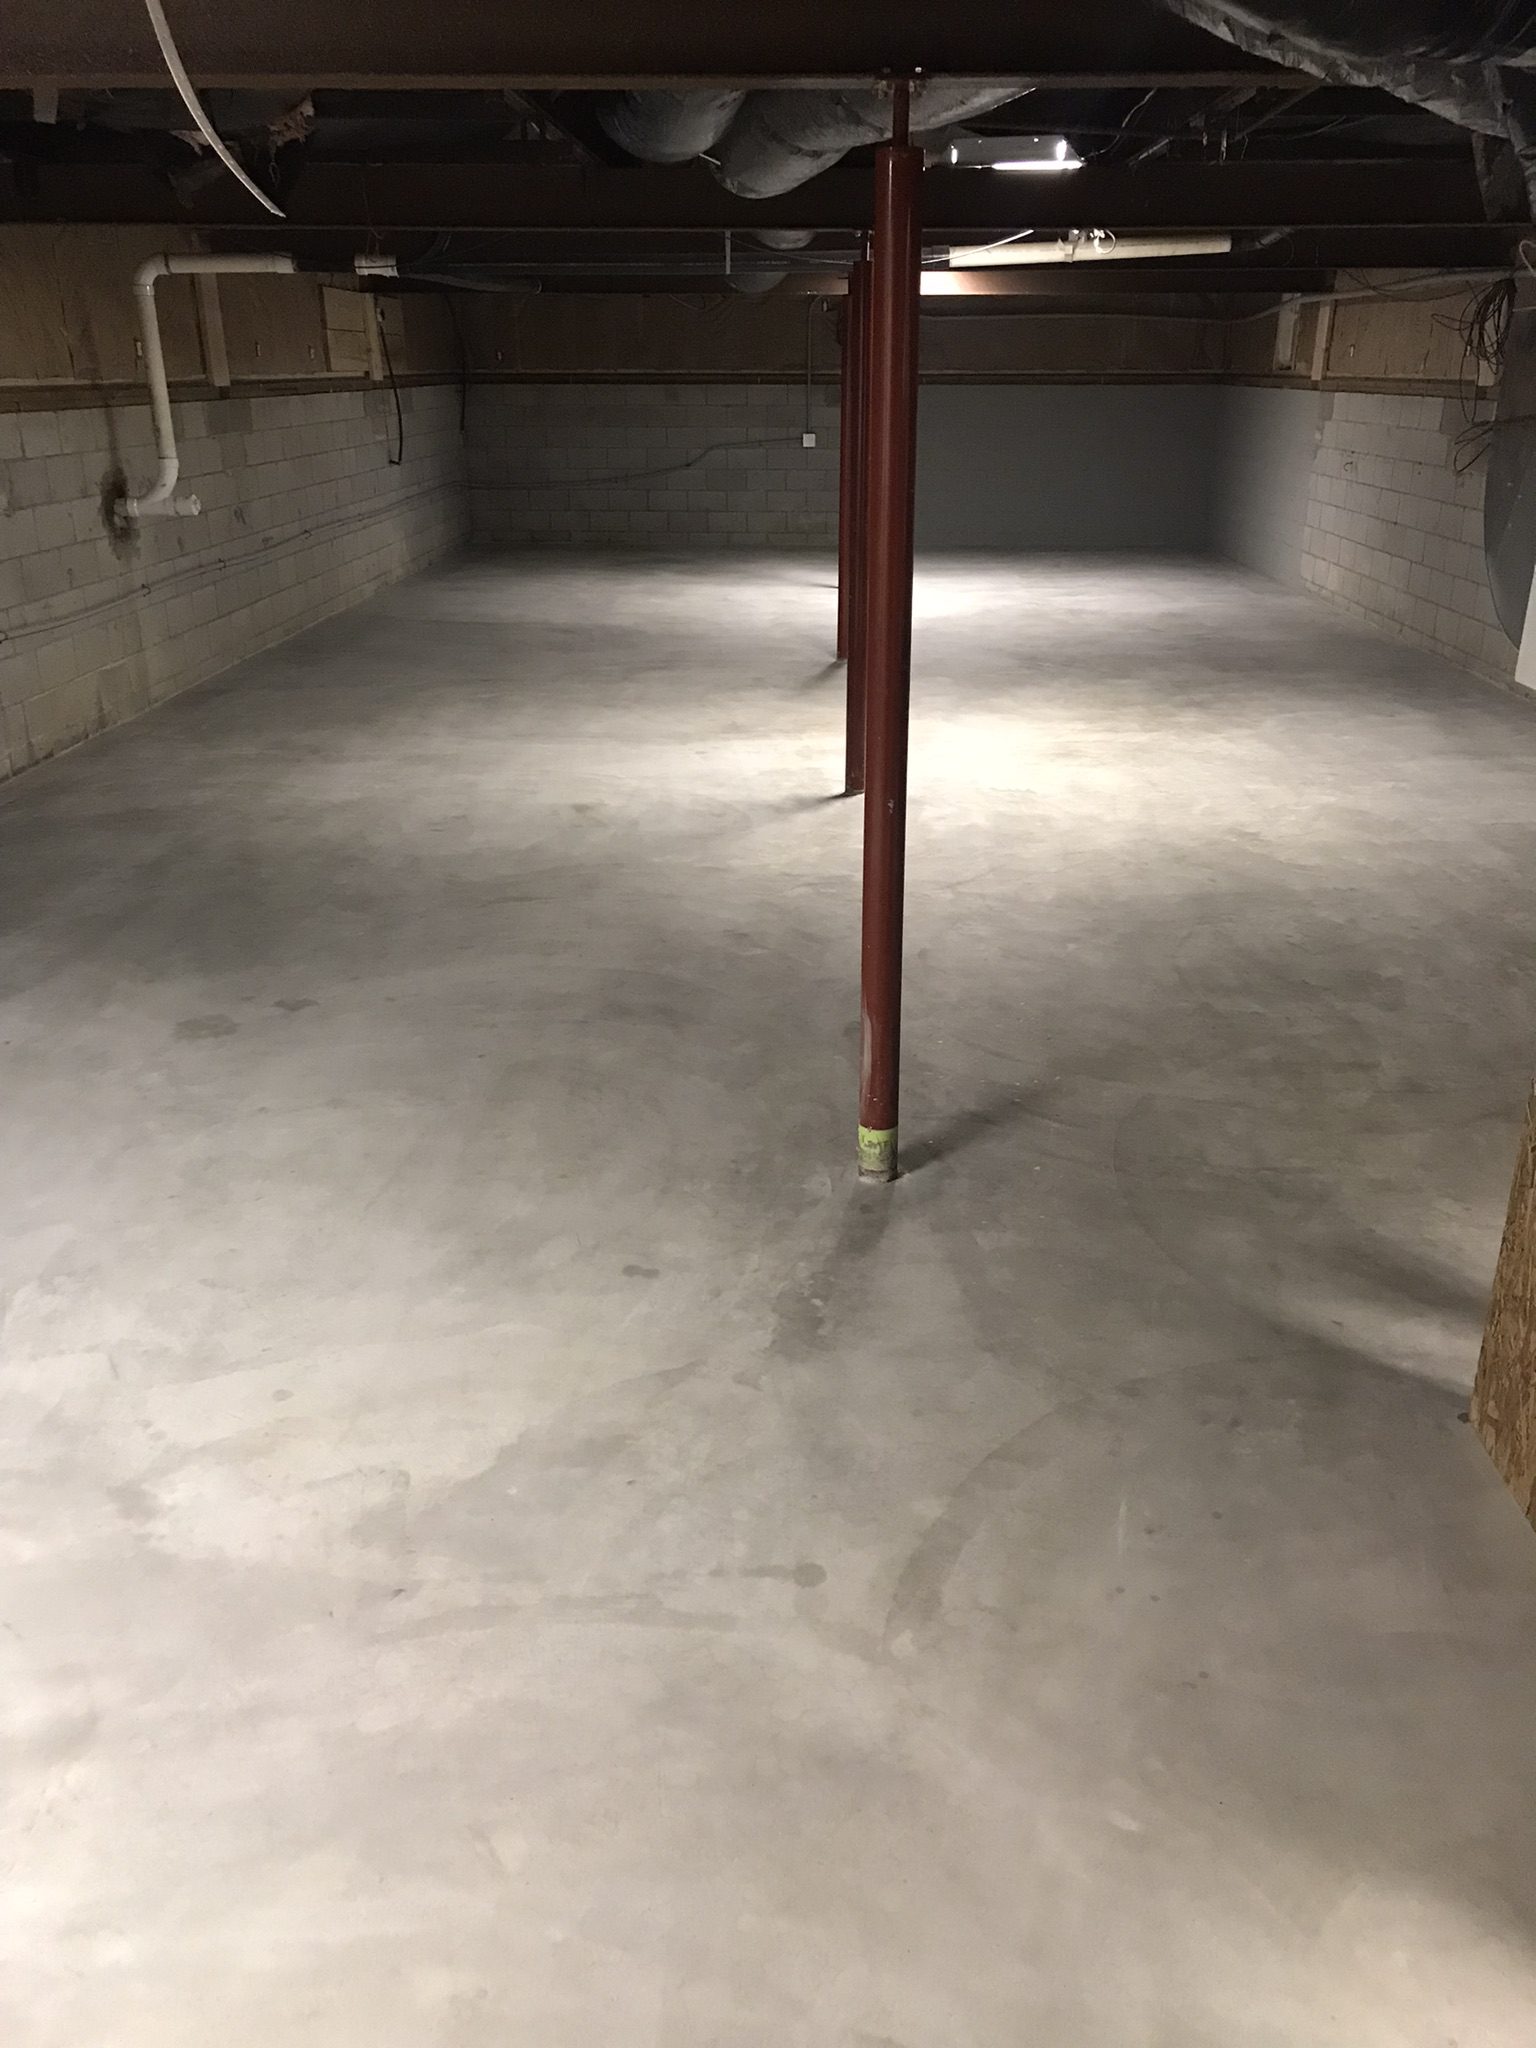 Bare basement space with plain walls and a raw concrete floor.